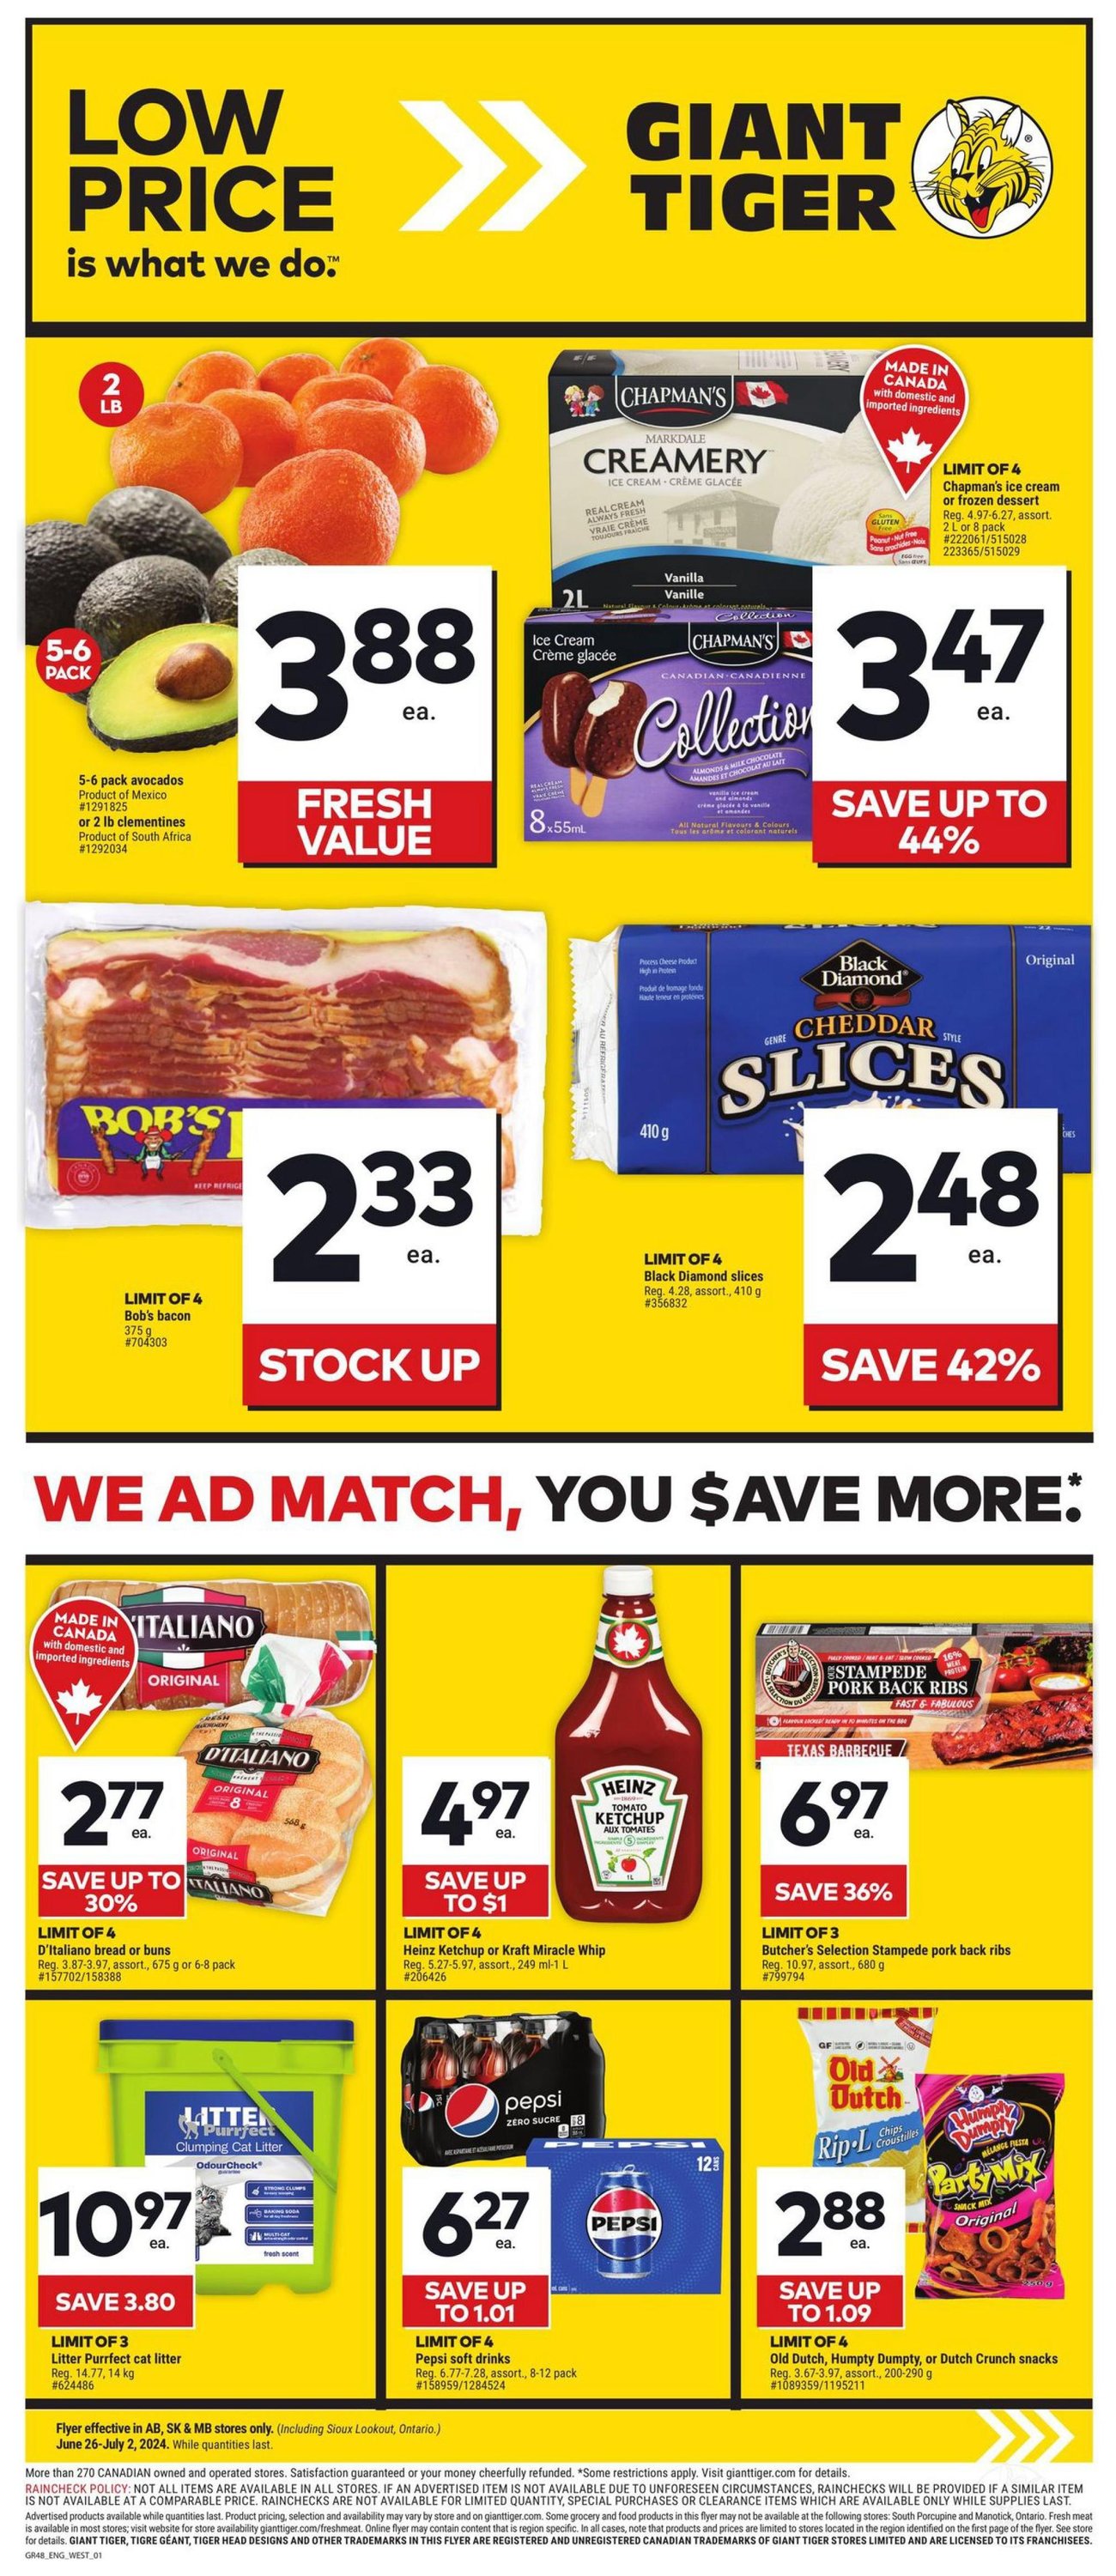 Giant Tiger - Western Canada - Weekly Flyer Specials - Page 1